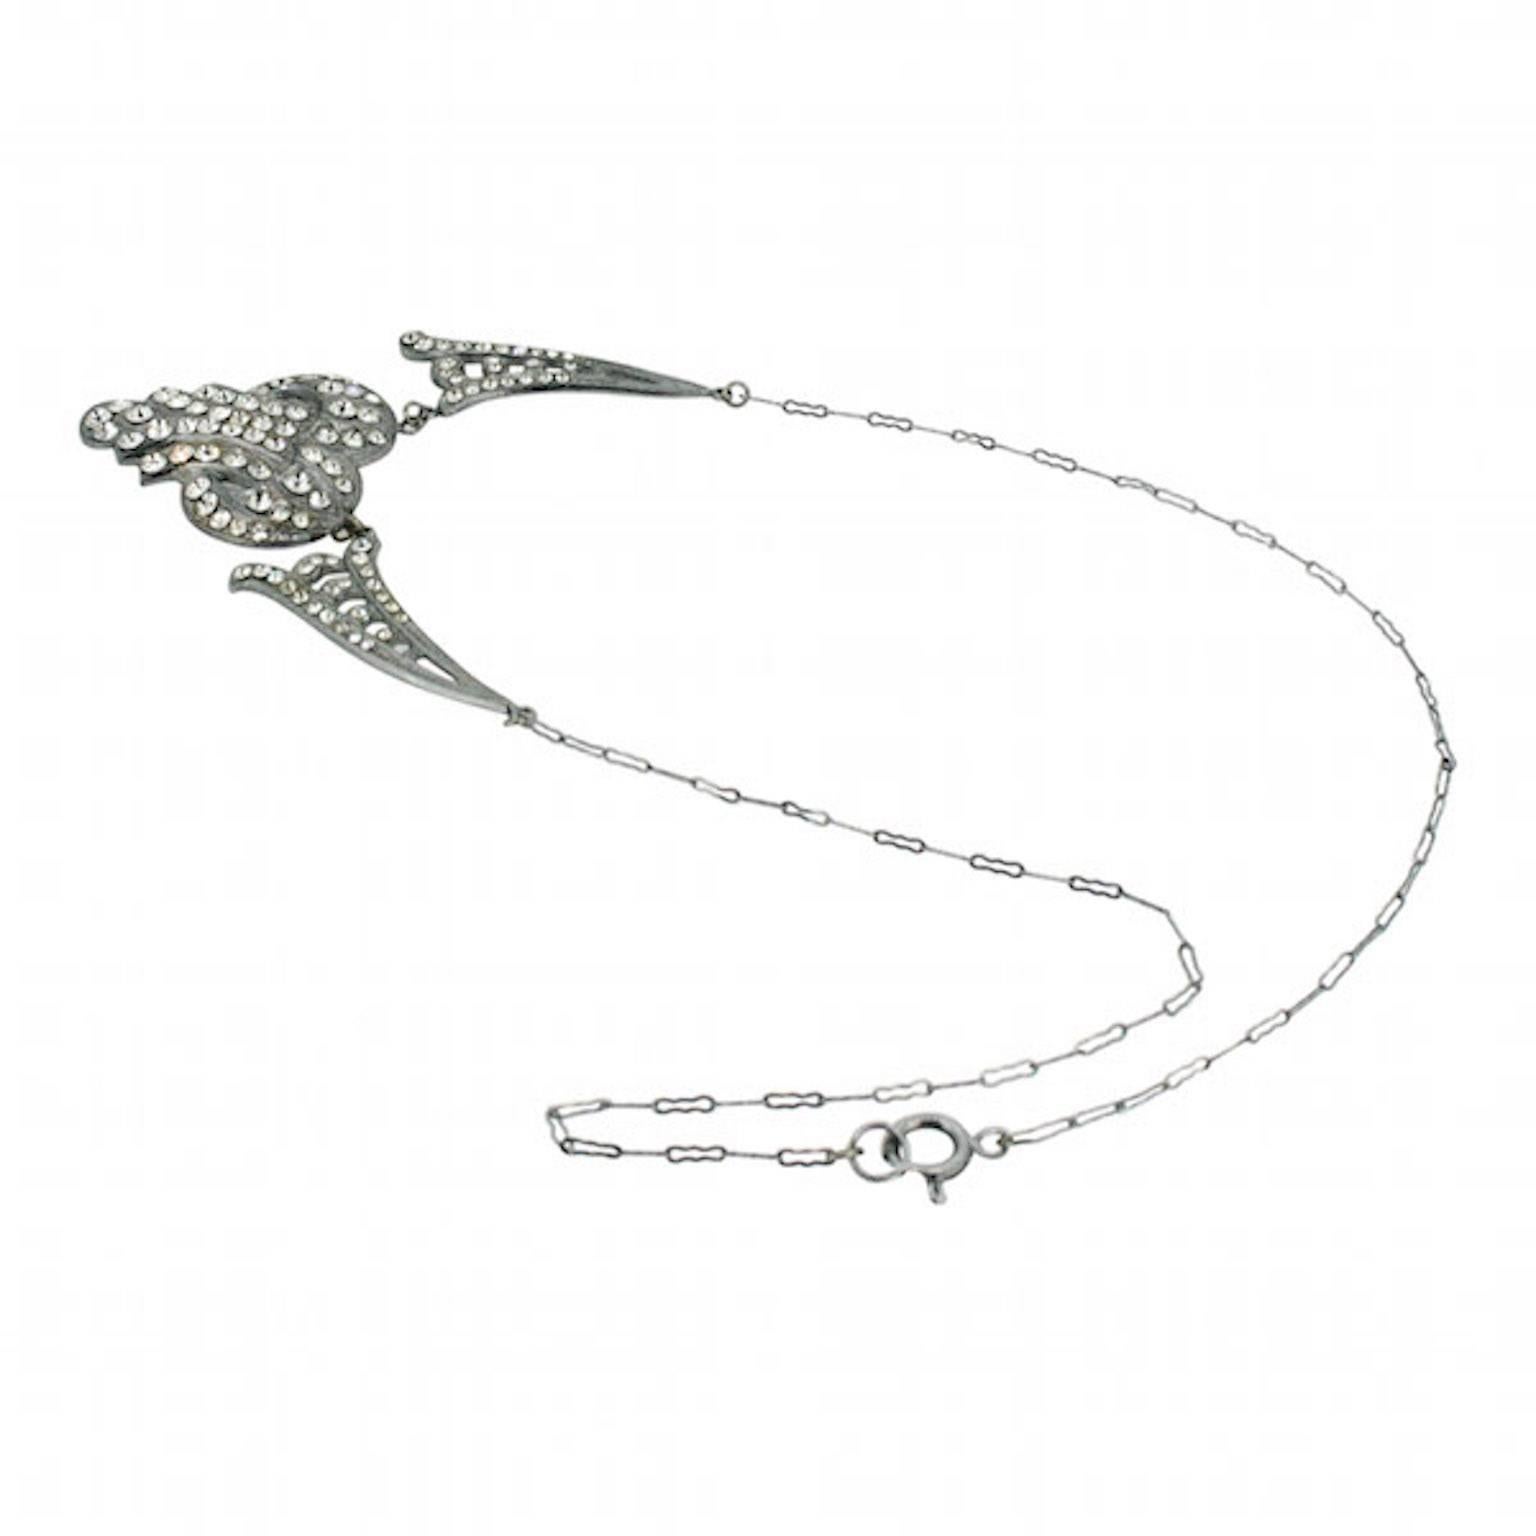 This elegant silver tone necklace necklace dates from the 1920s. Although unsigned, this piece is beautifully crafted and timeless.

Condition Report:
Excellent

The Details...
This silver tone necklace has a open link chain and is 40cm in length,